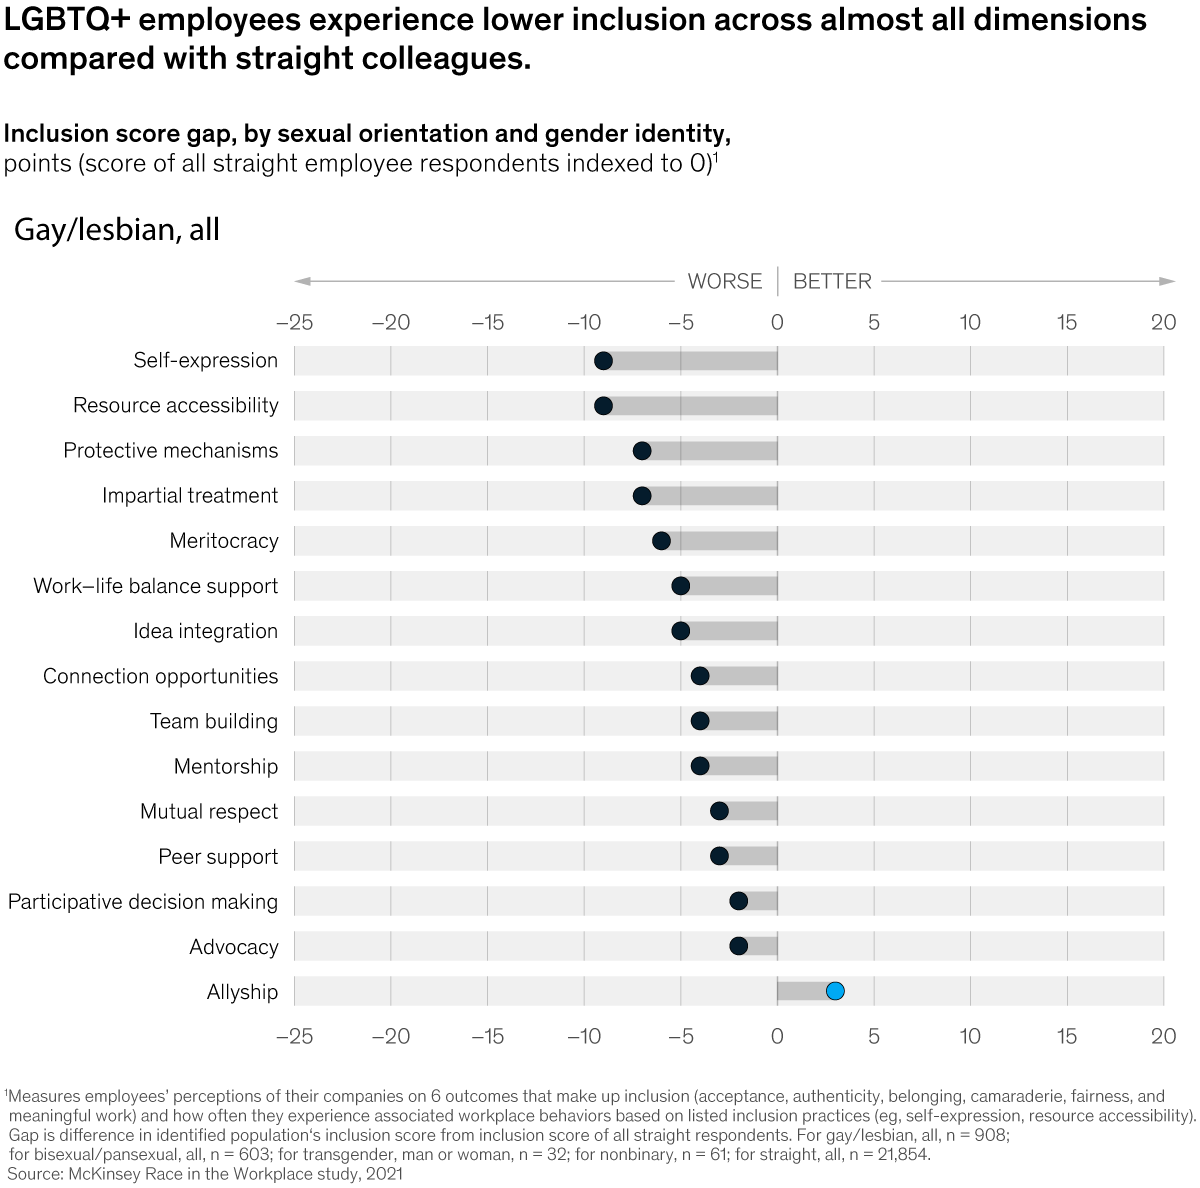 Chart of the inclusion score gap by sexual orientation and gender identity